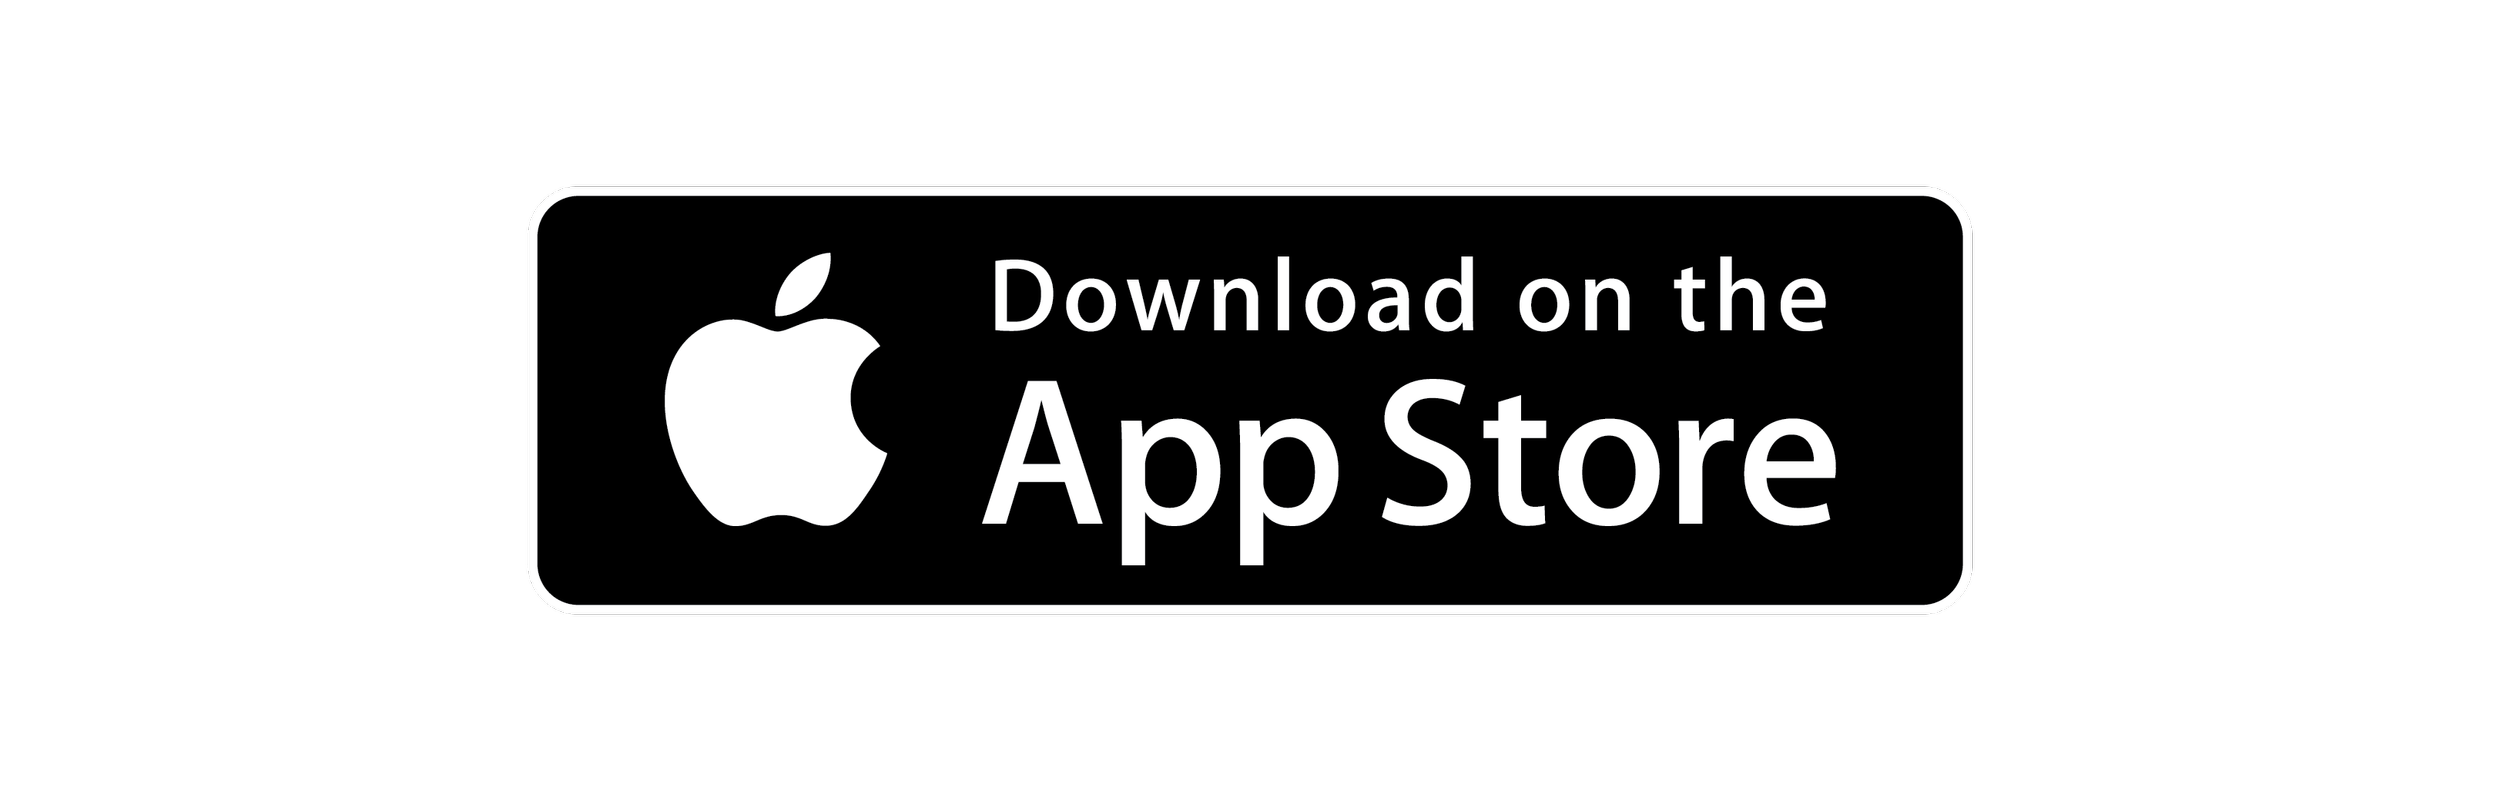 App store icon 4.png